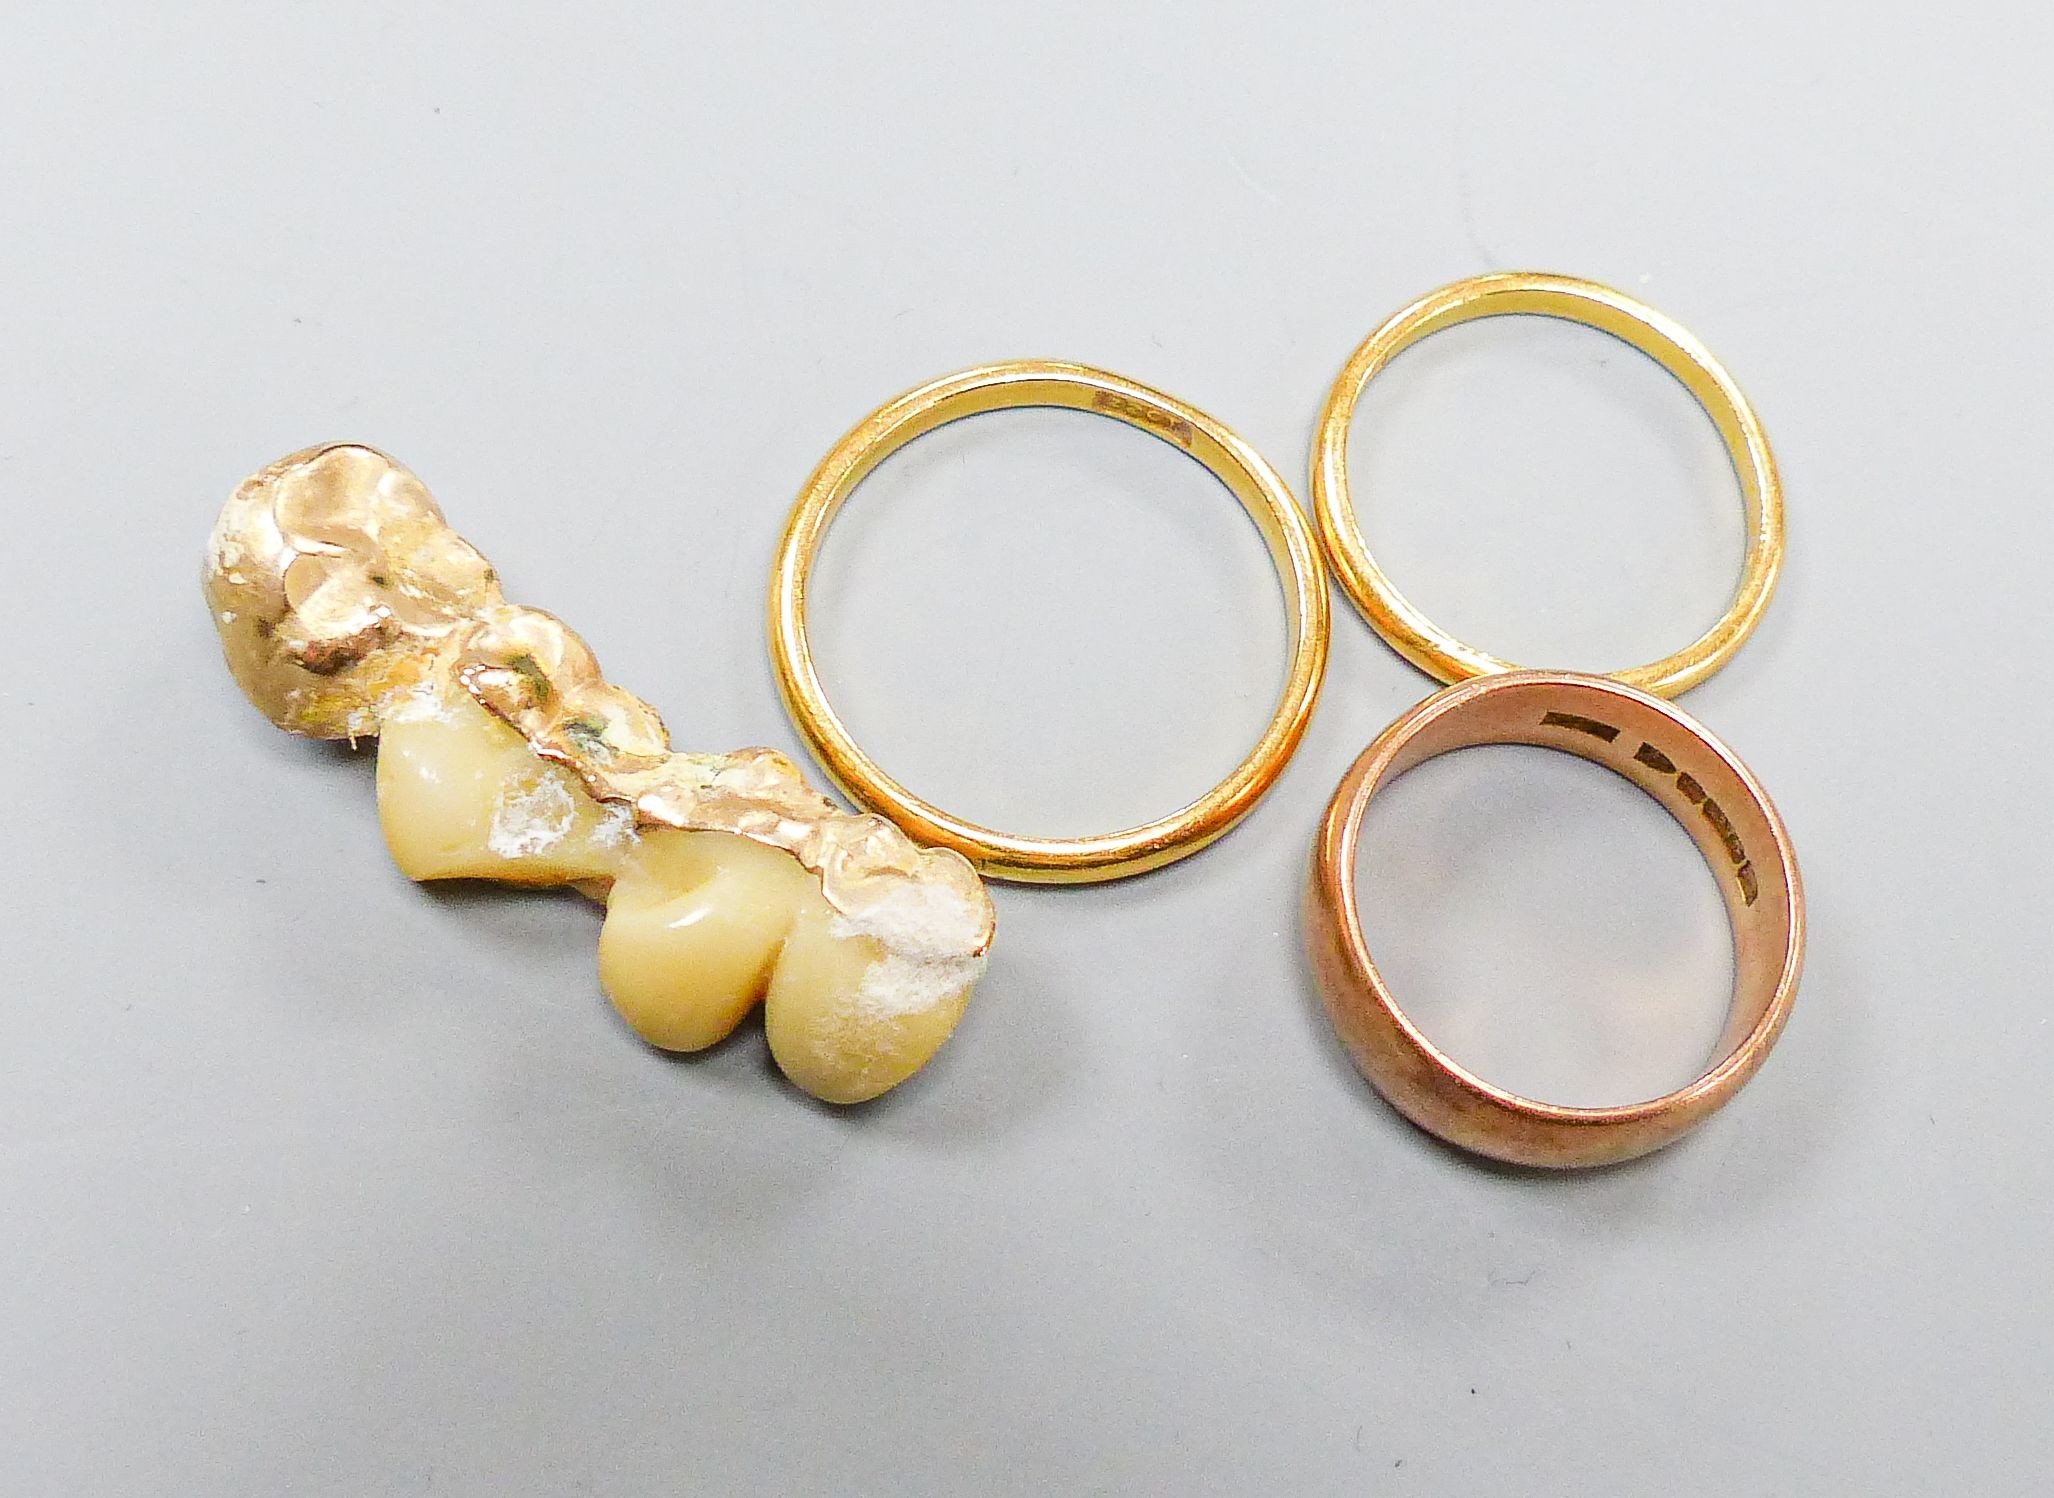 Two 22ct wedding rings, 5.7 grams, a 9ct rose gold wedding band 4.6 grams and four gold-mounted teeth.